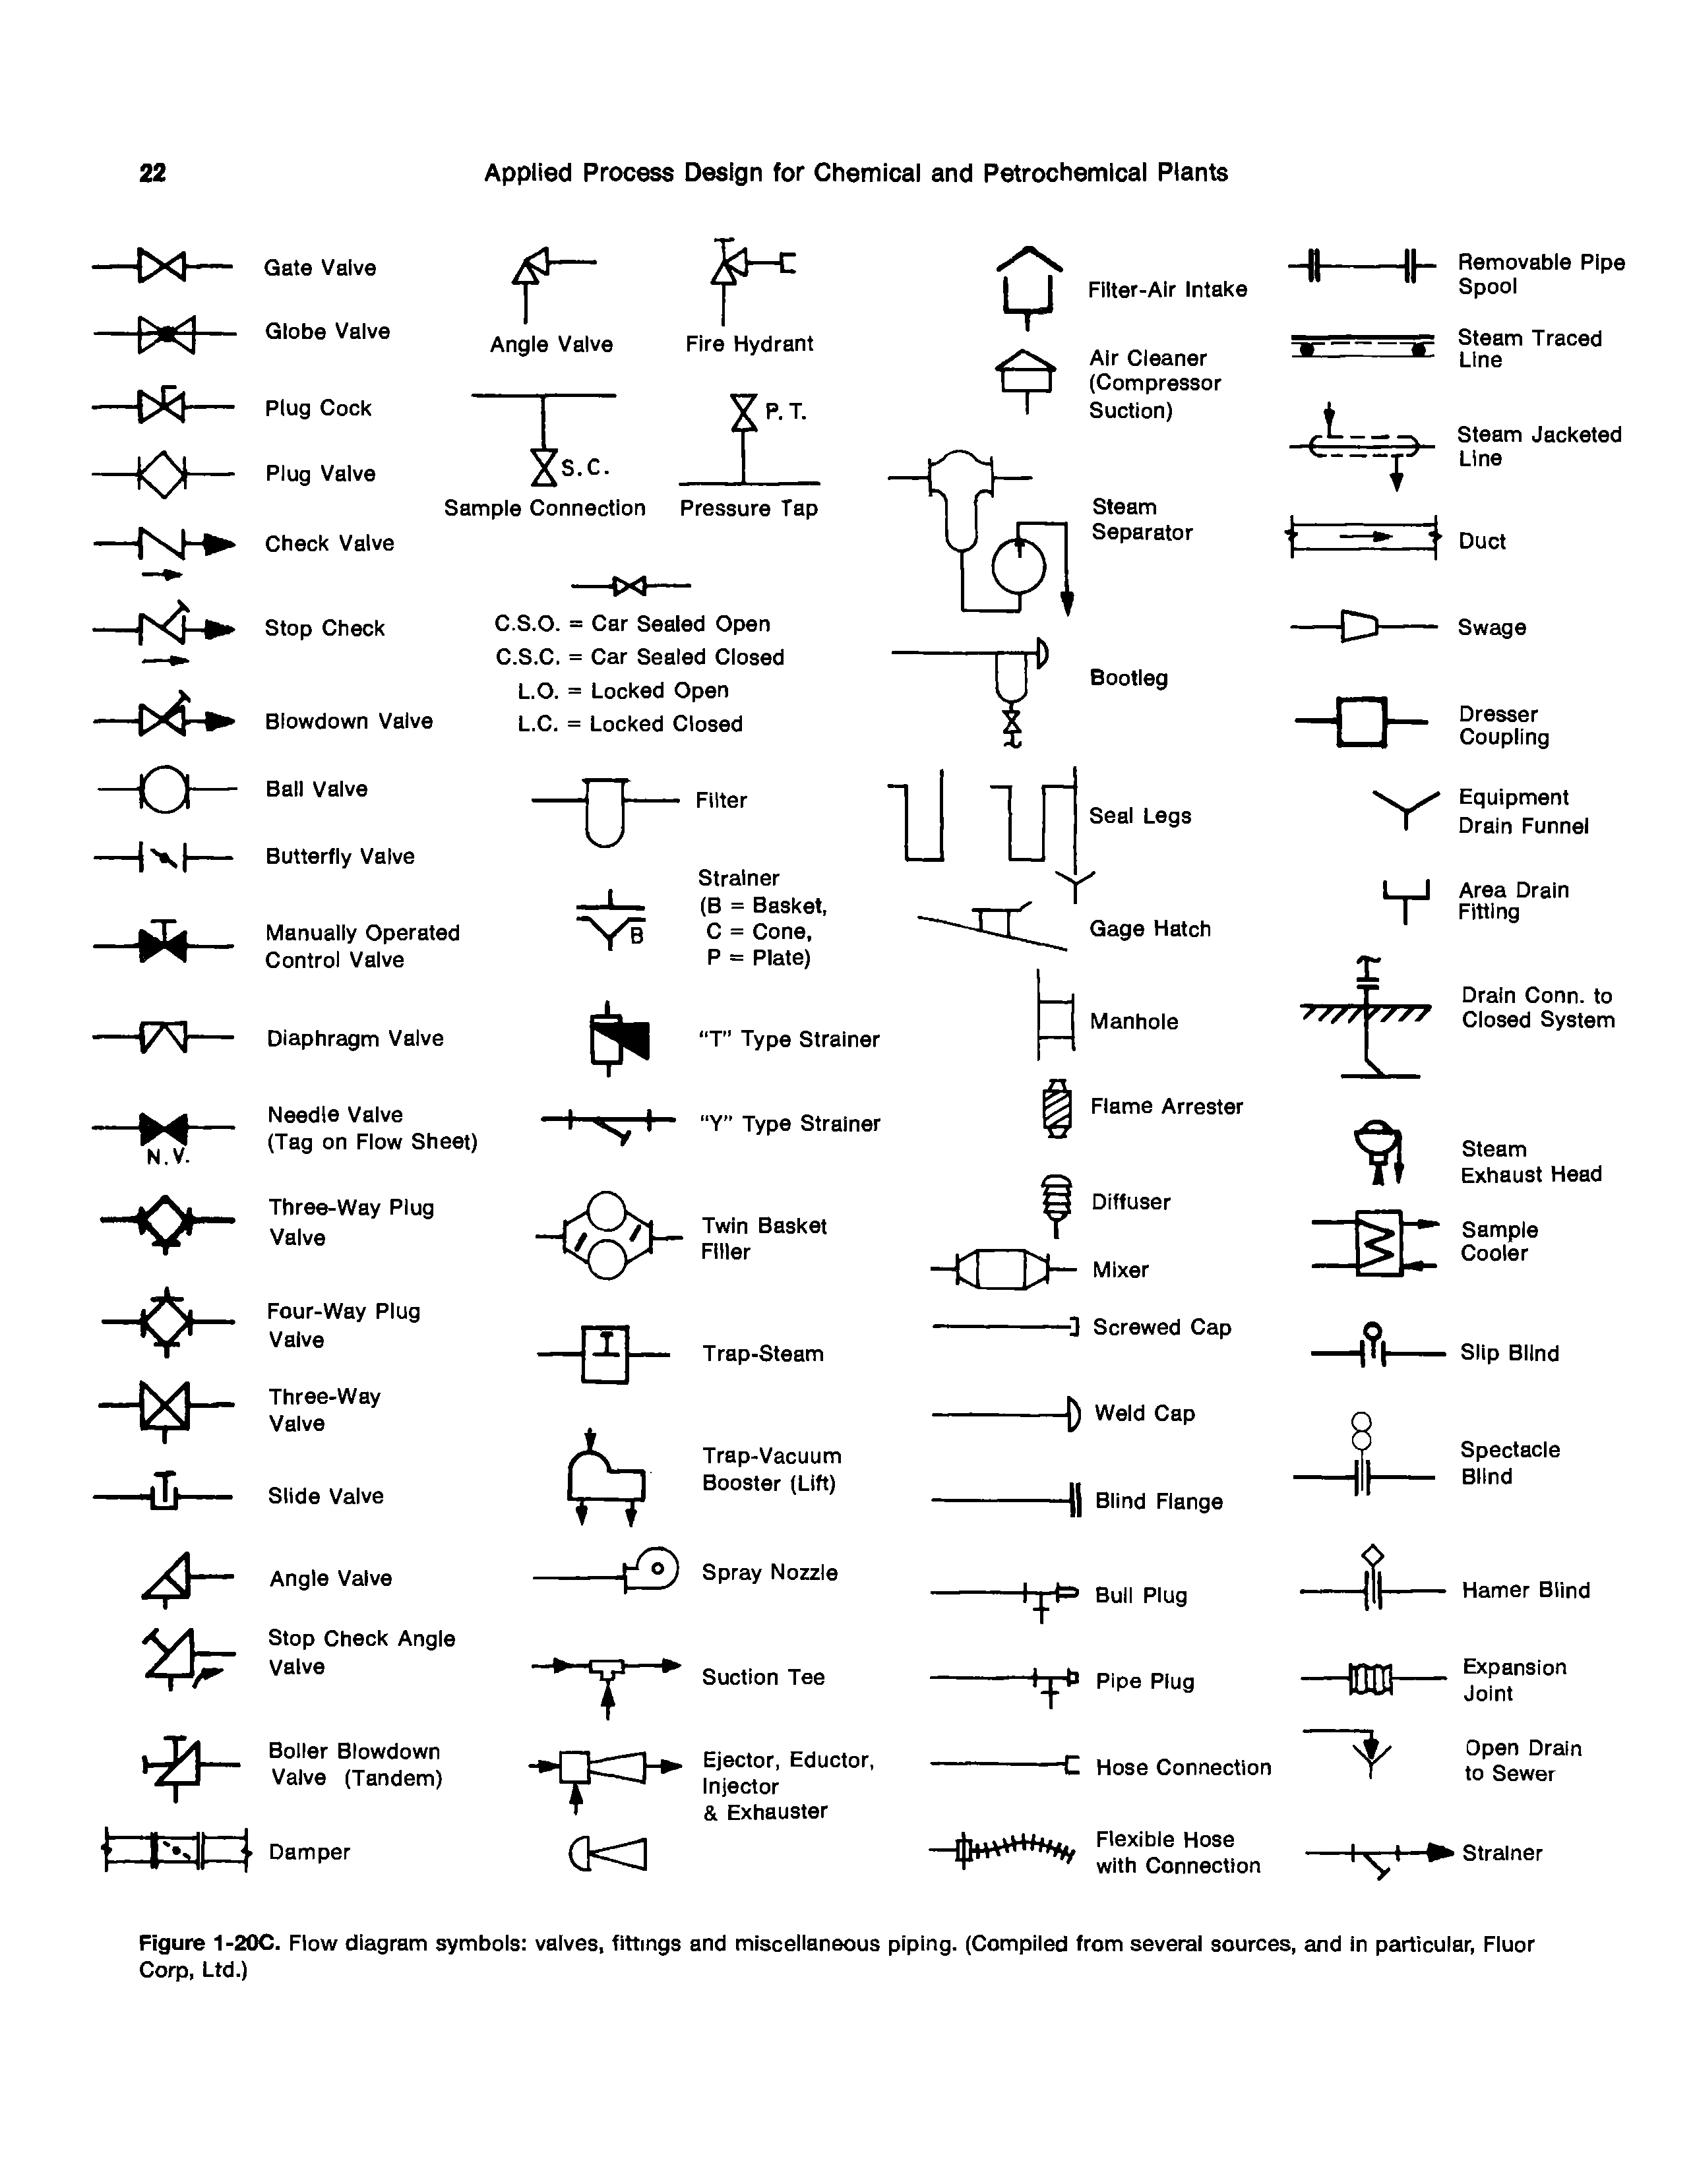 Figure 1-20C. Flow diagram symbols valves, fittings and miscellaneous piping. (Compiled from several sources, and in particular, Fluor Corp, Ltd.)...